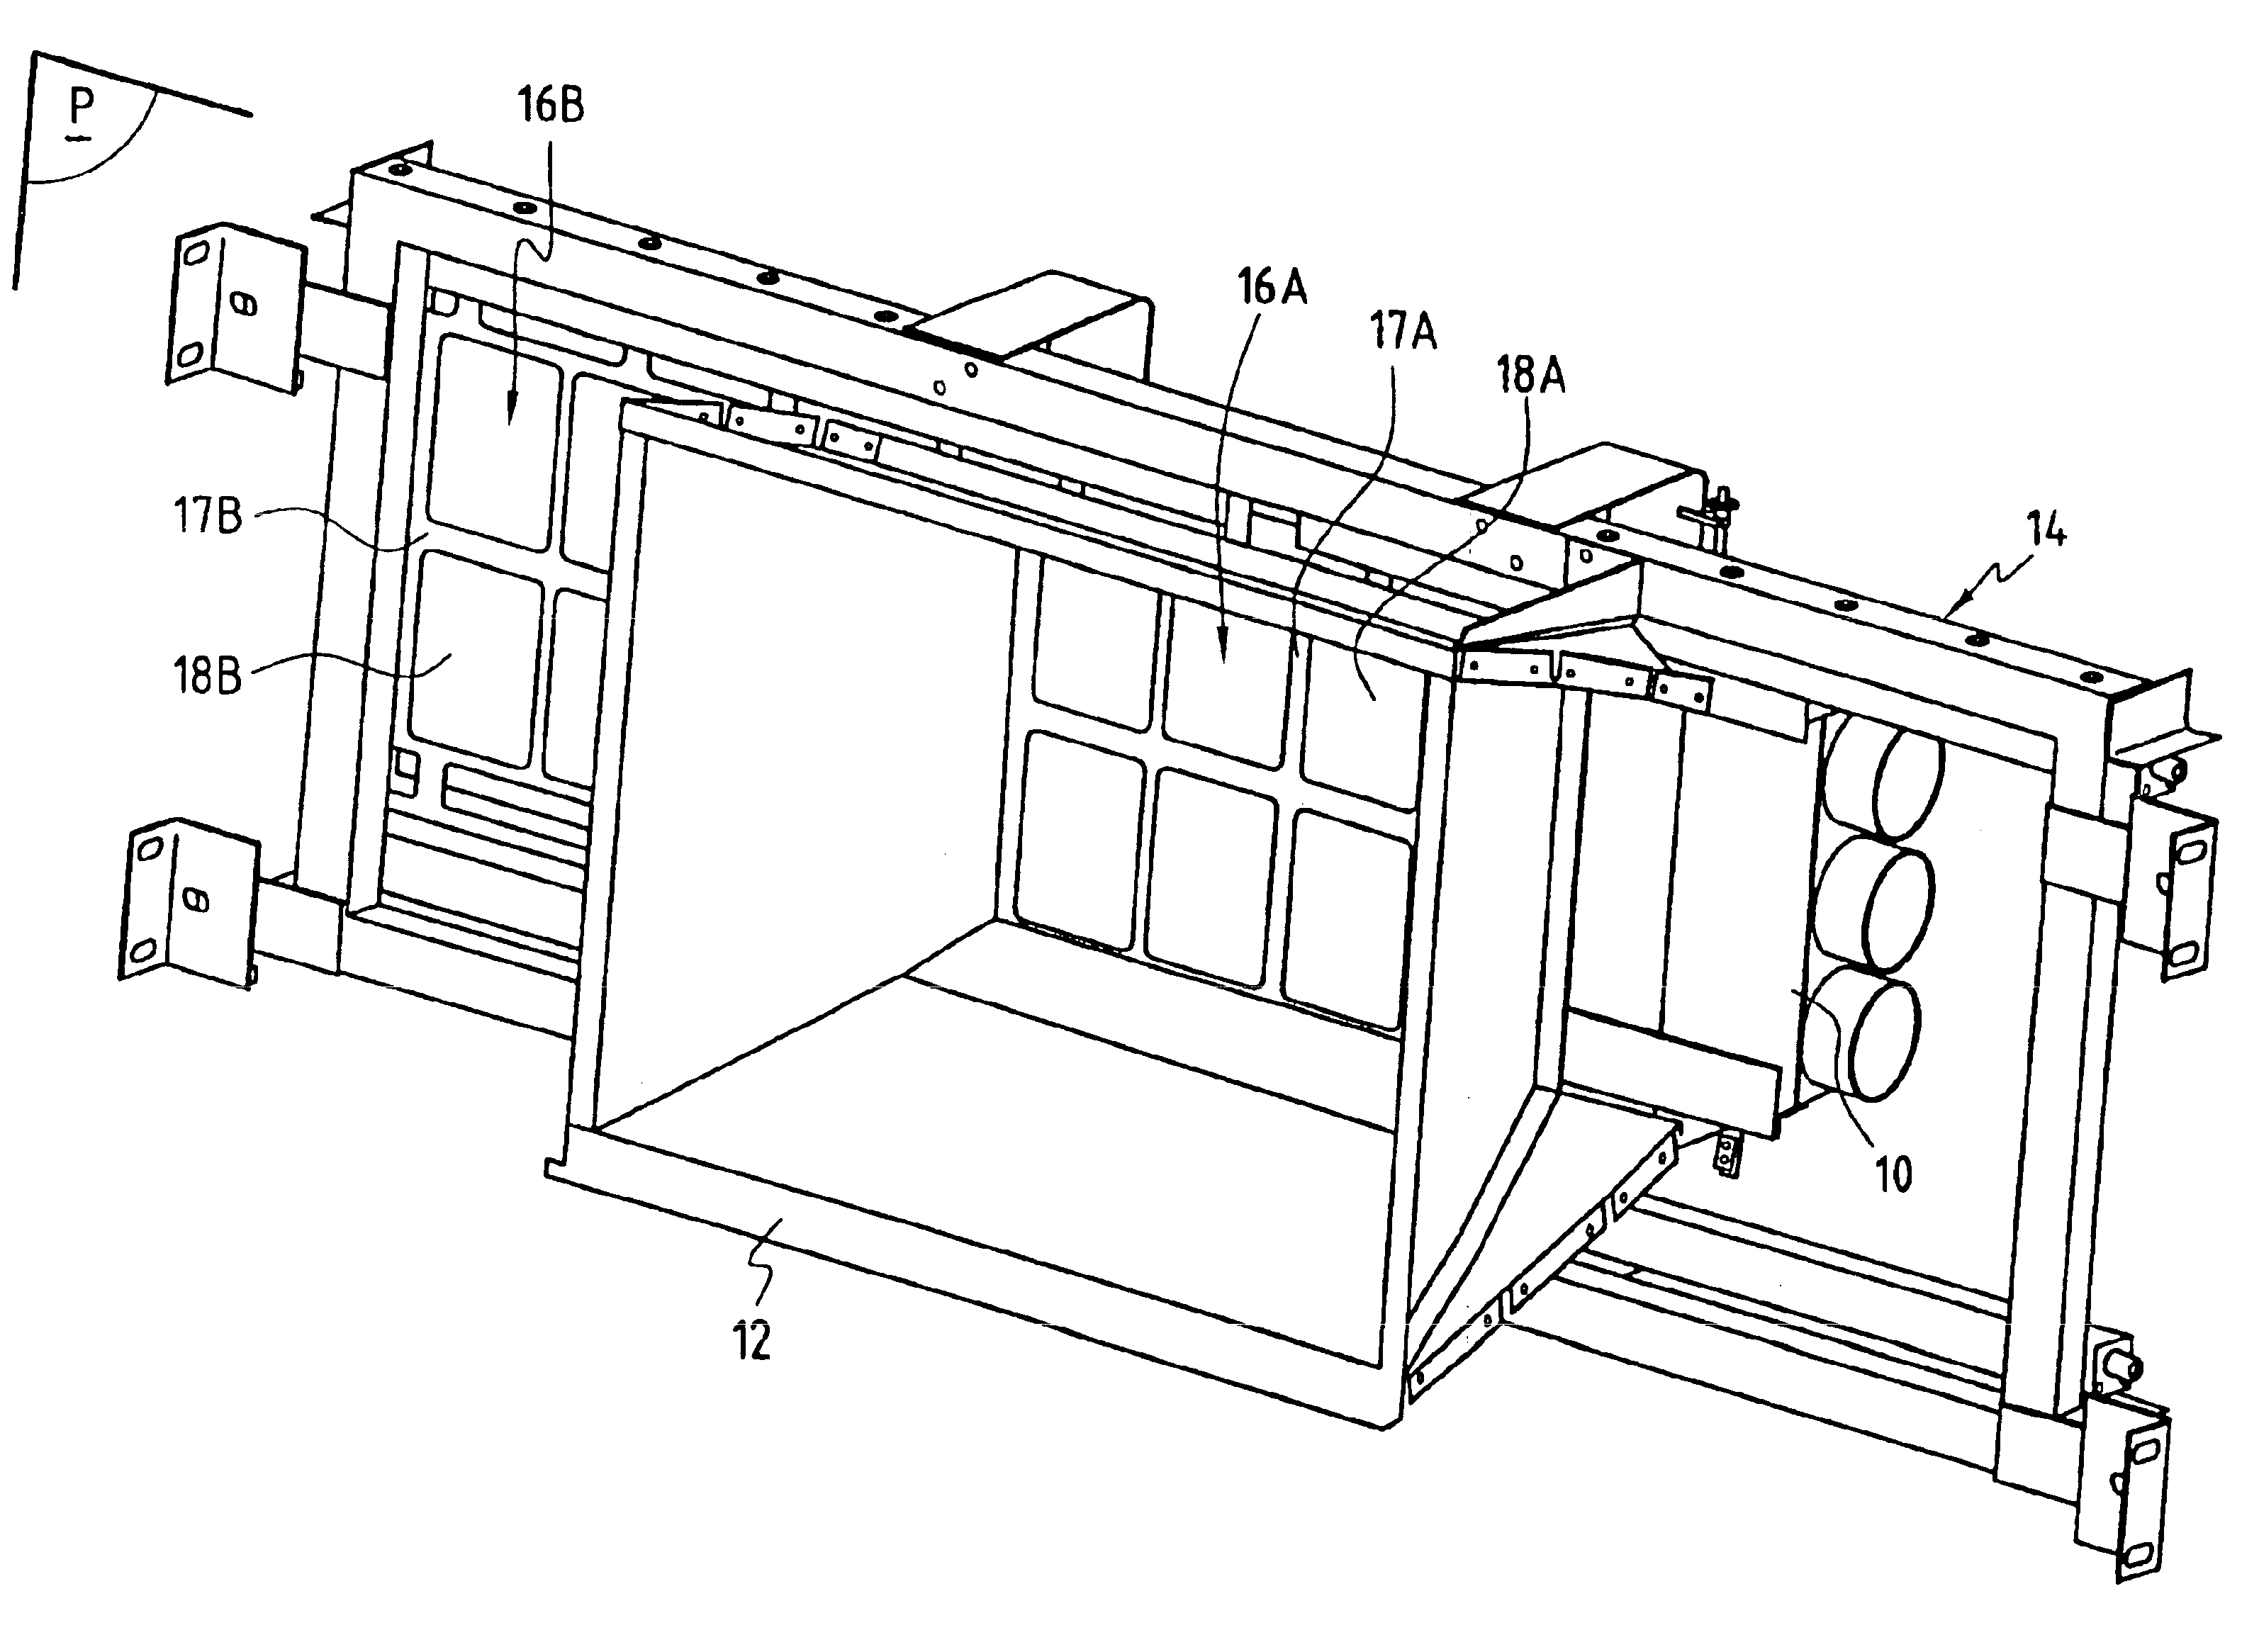 Device for exposing a face of a panel